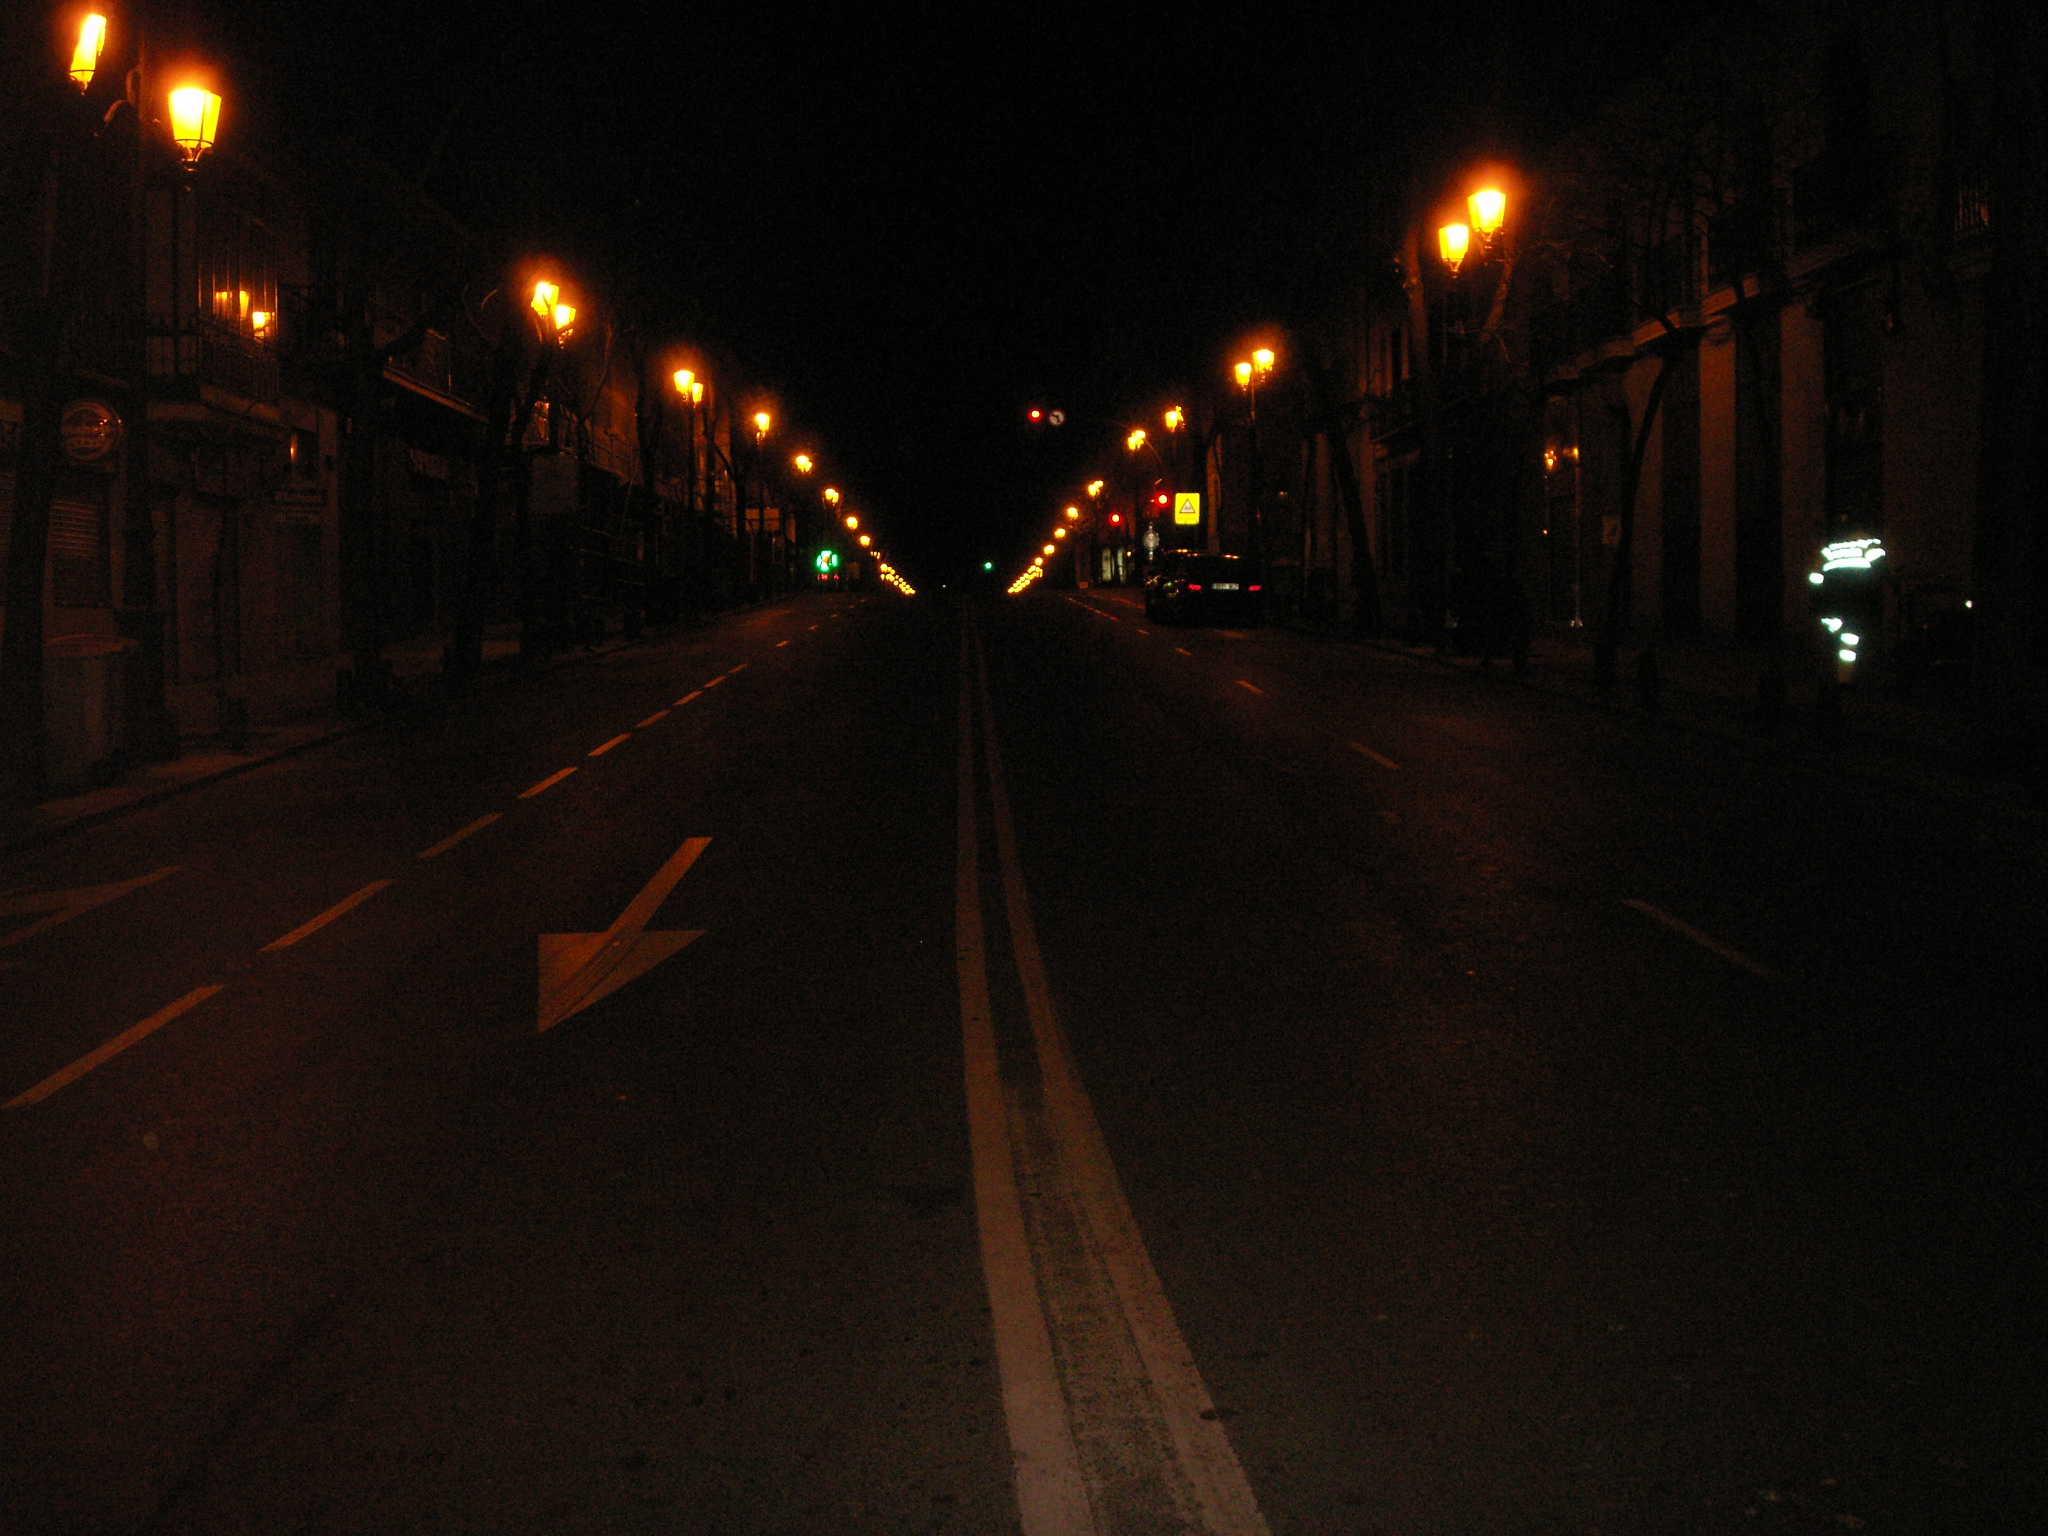 an empty city street is pictured at night with lights on